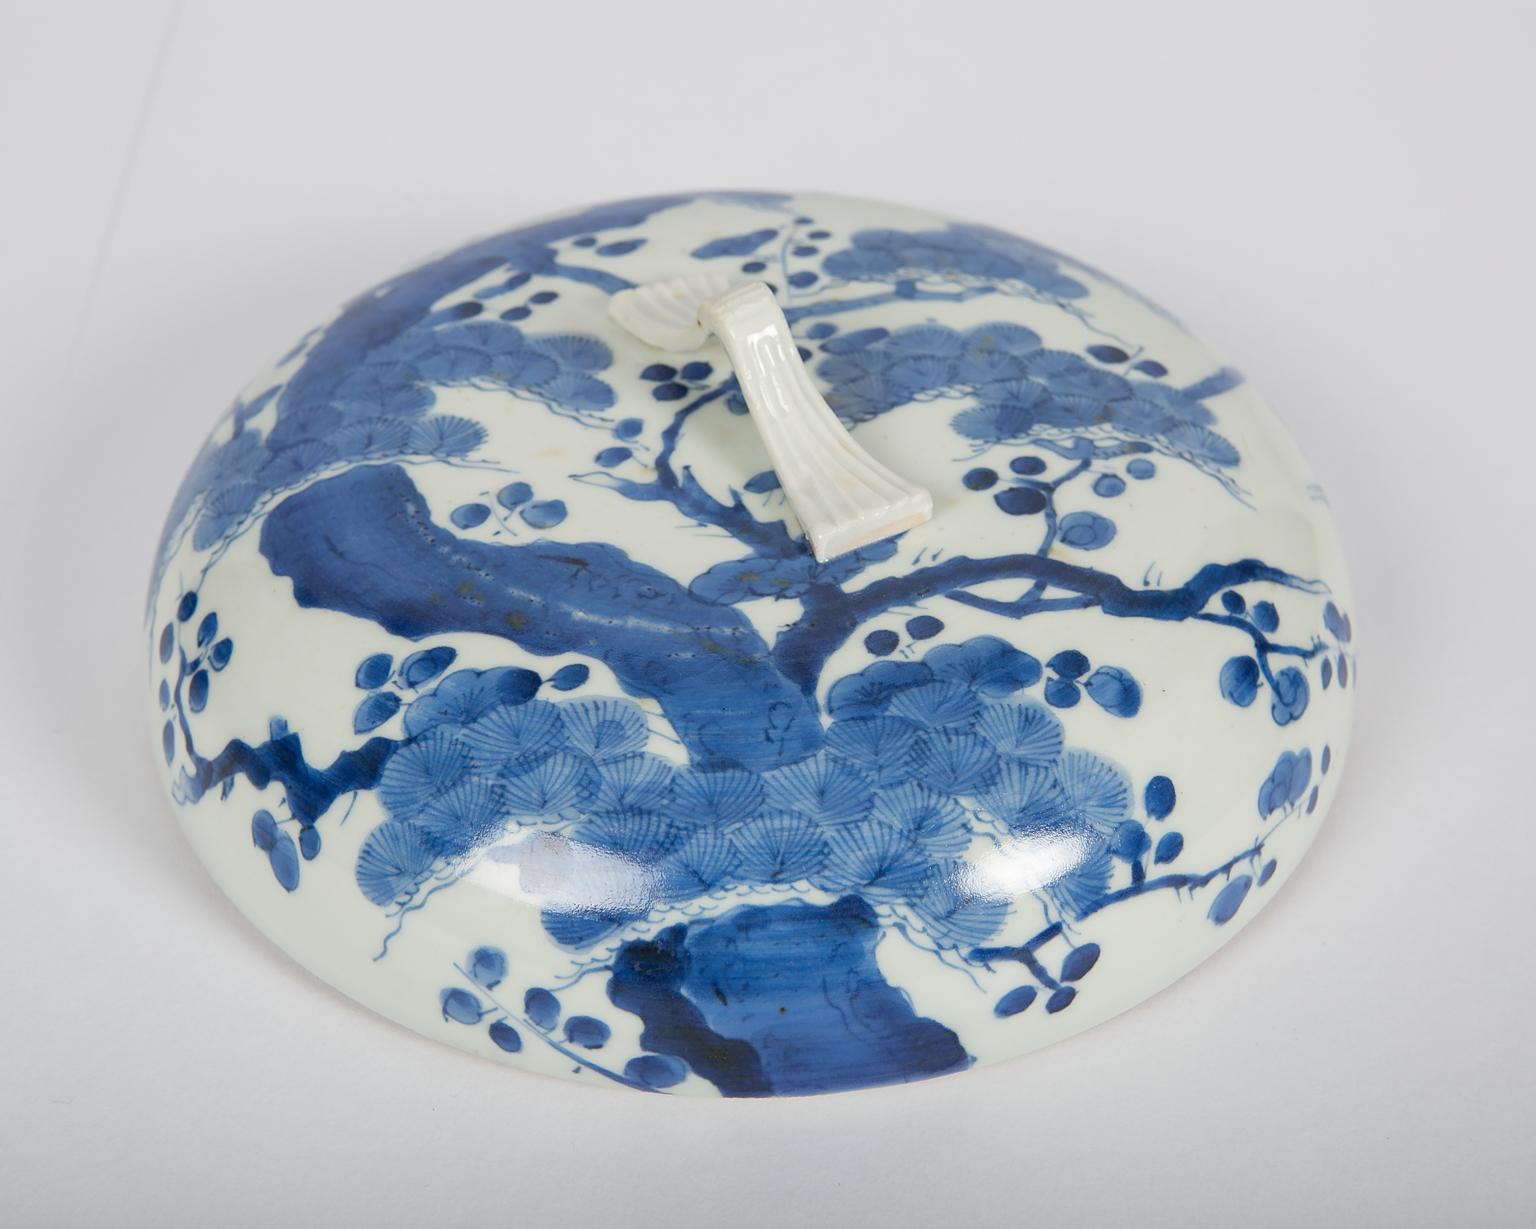 Hand-Painted Antique Japanese Blue and White Porcelain Bowl circa 1760